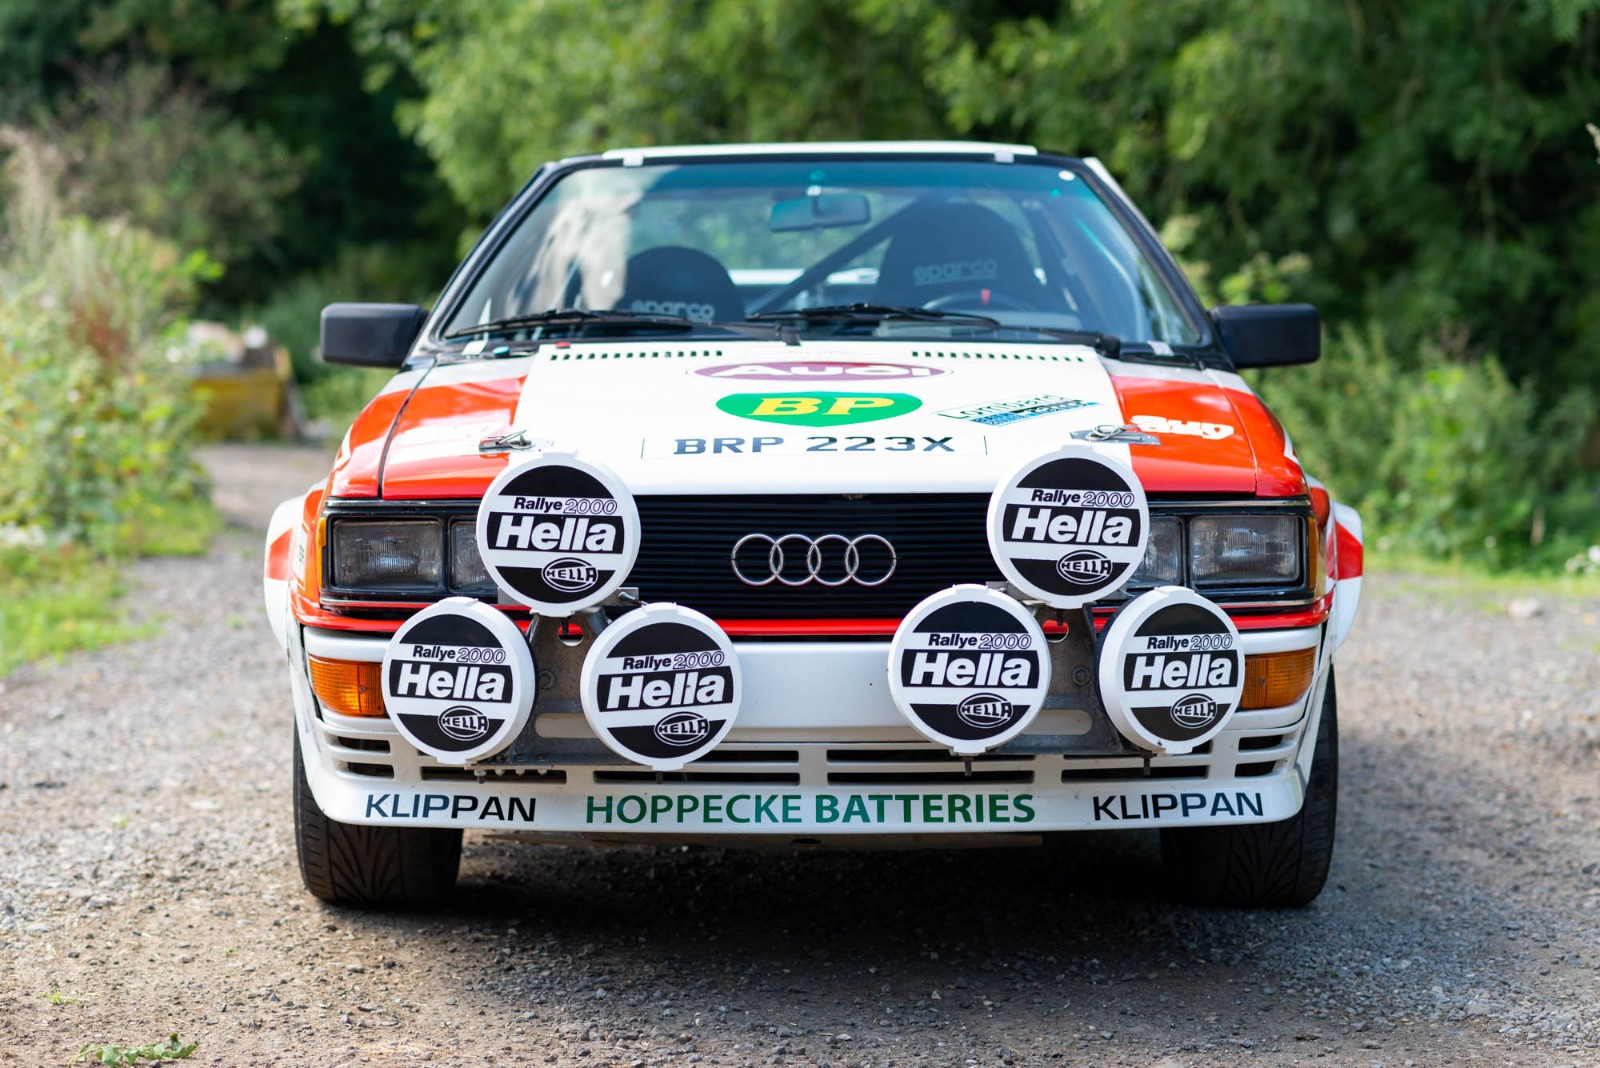 Find of the Day: 1983 Audi 80 quattro Works Rally - Audi Club